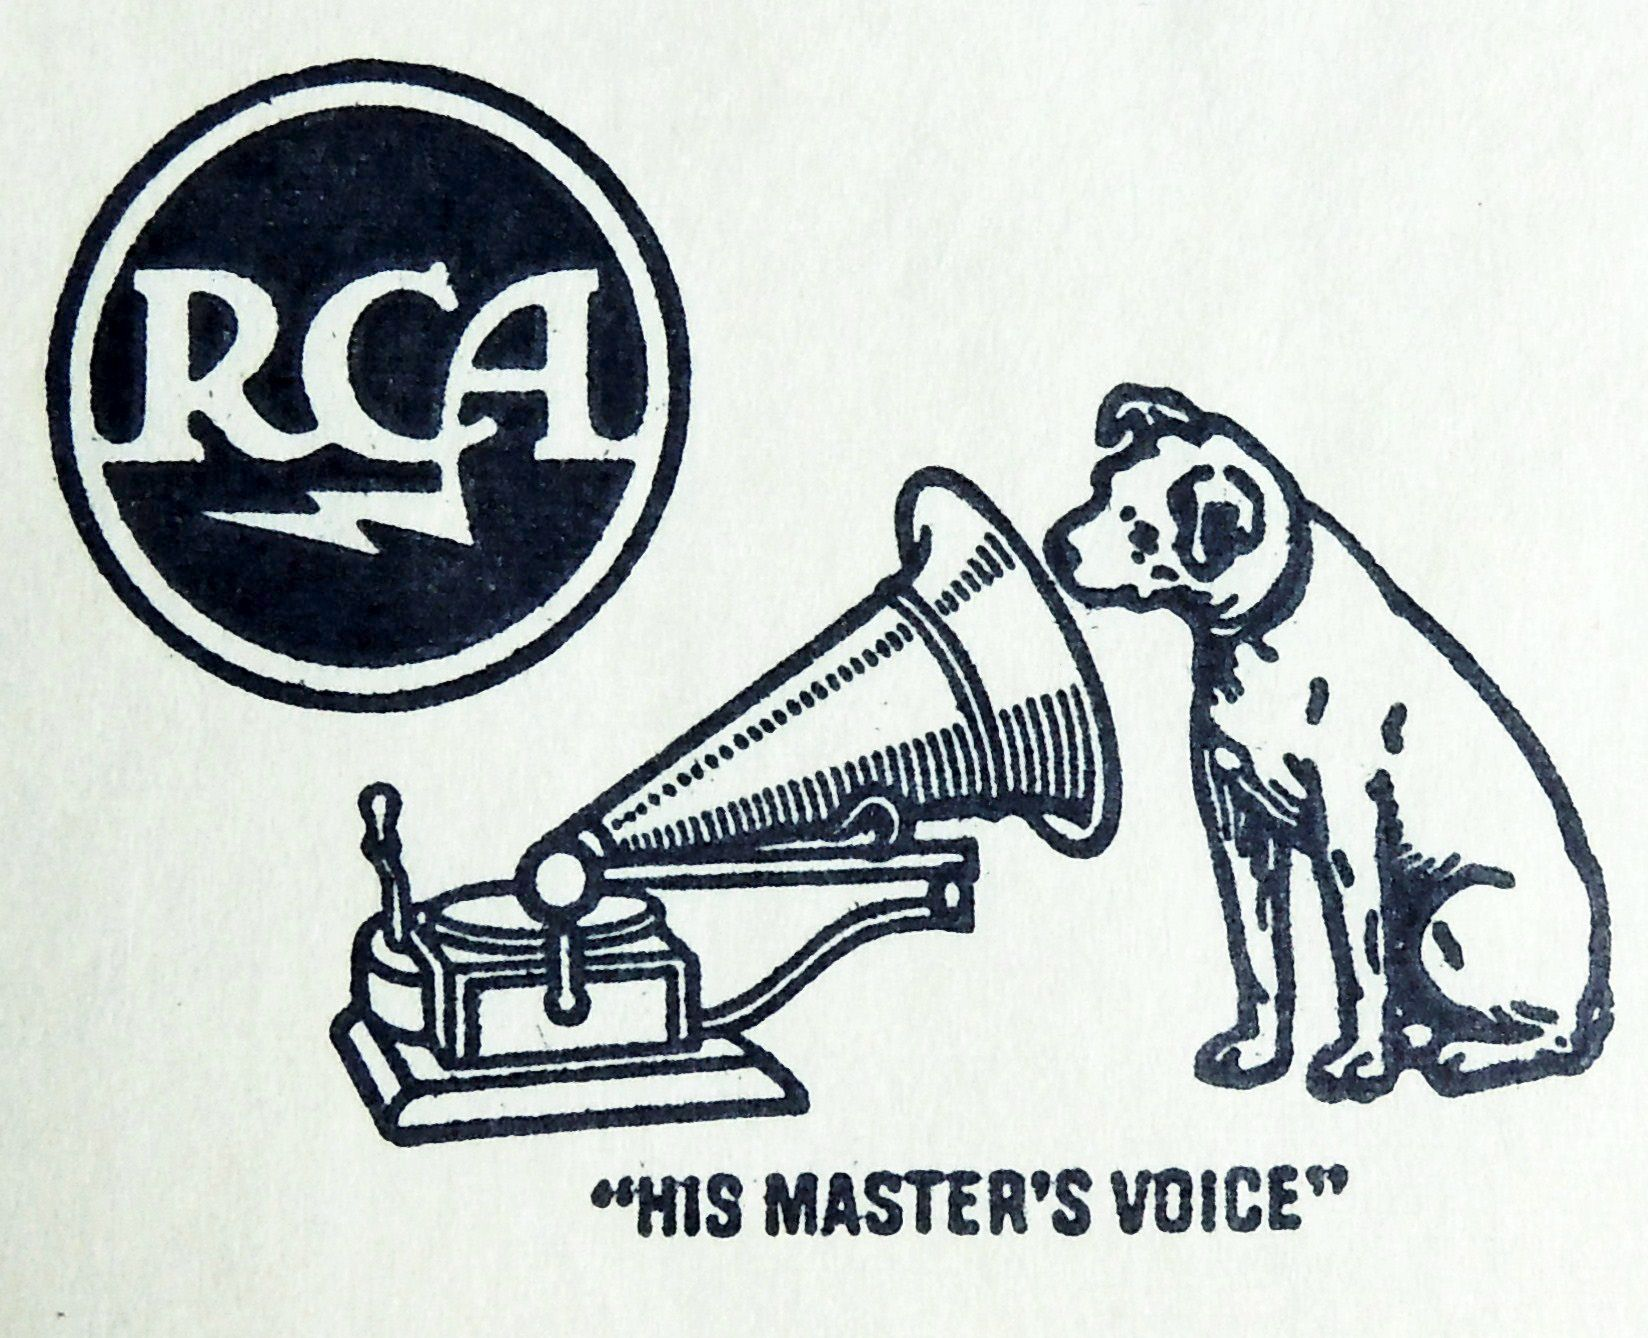 RCA & Color TV: A dominant company and standard, both now gone – Part 1